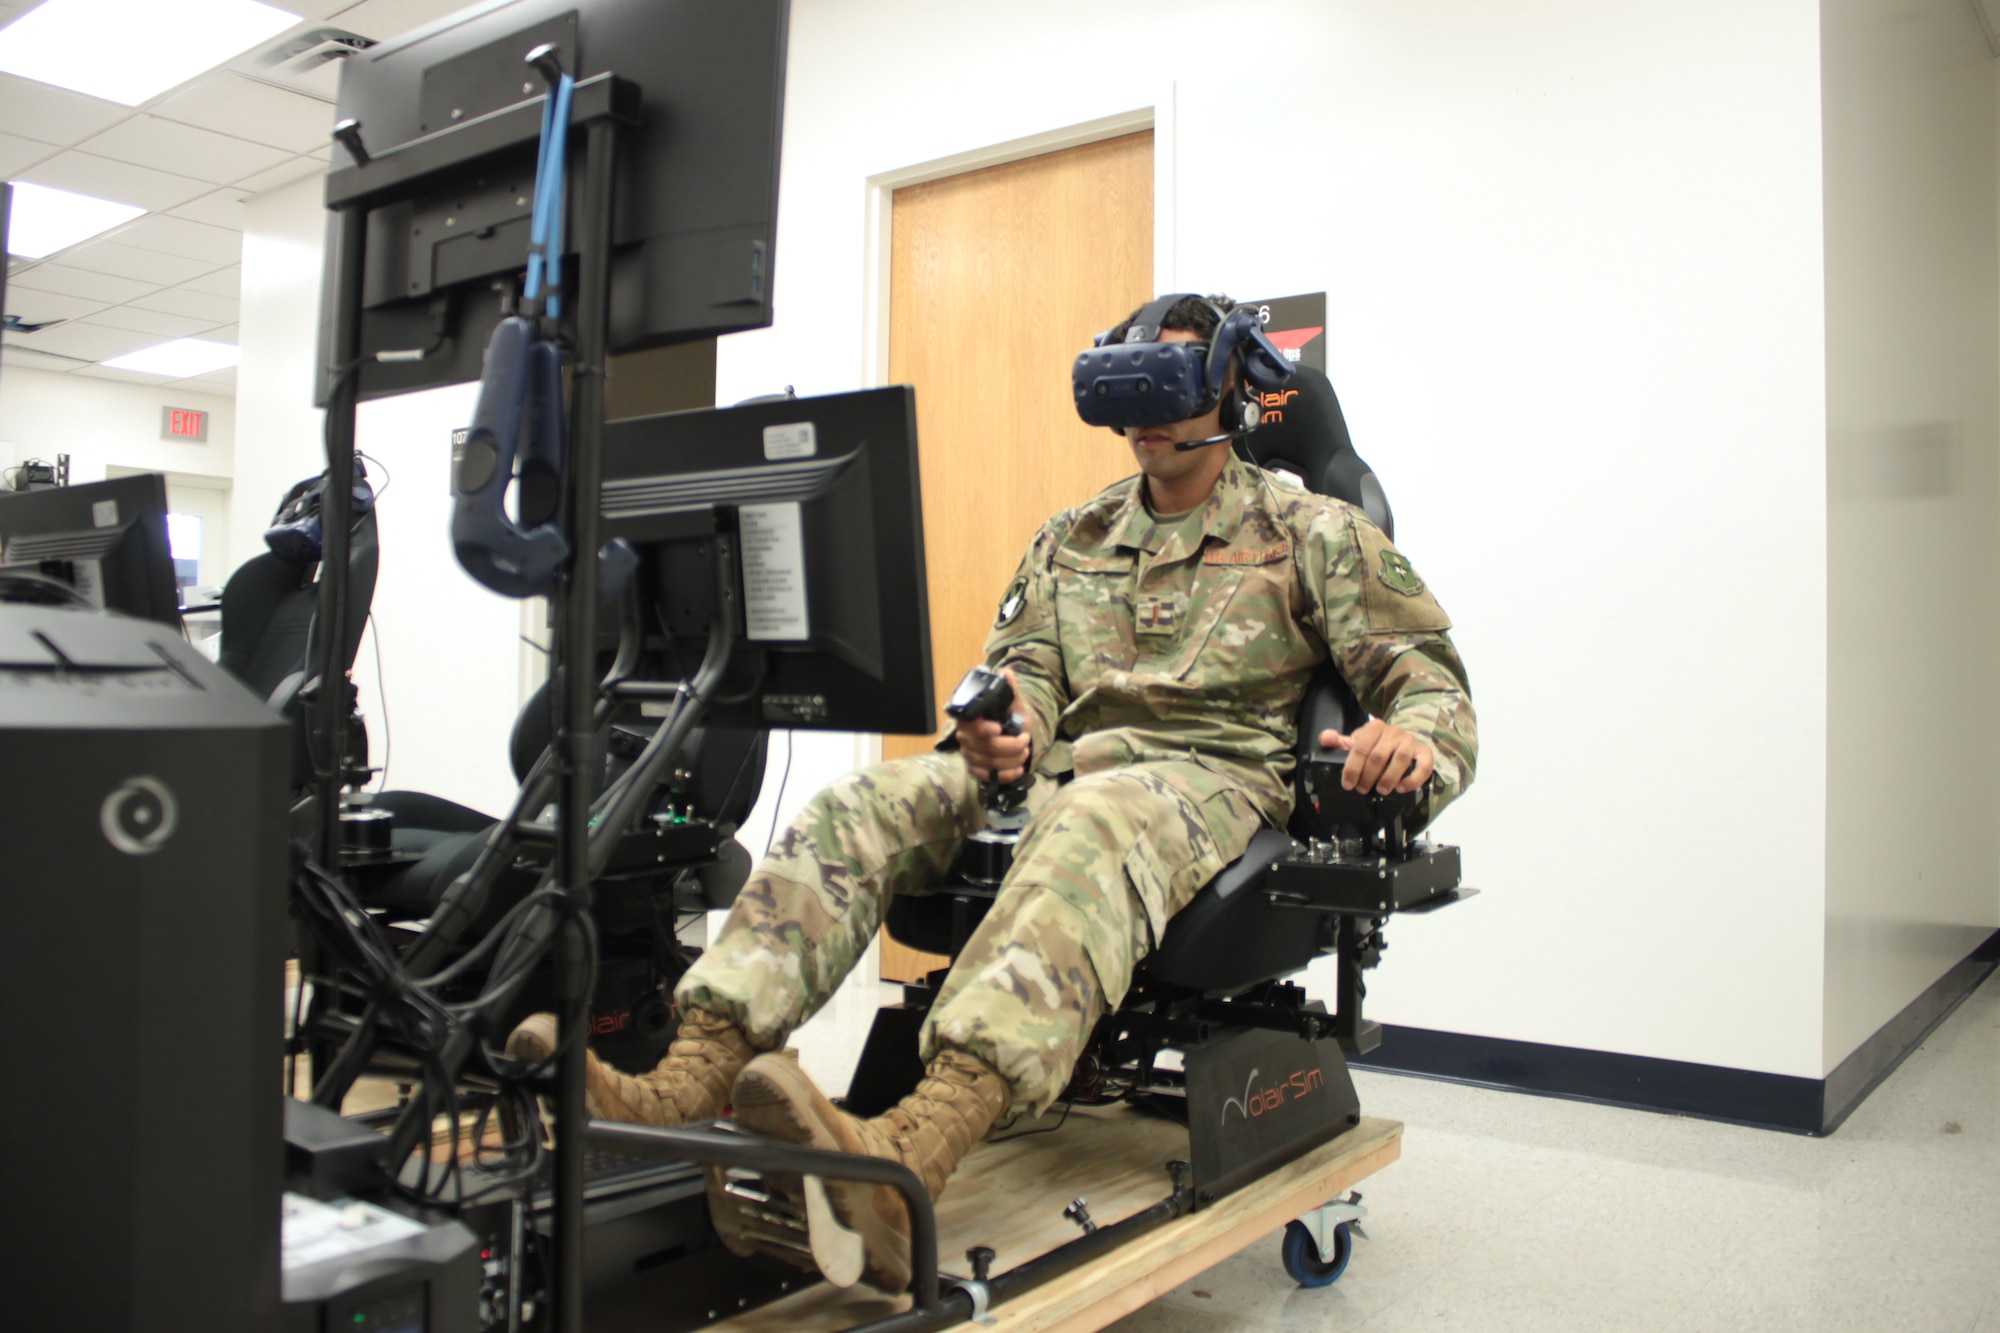 U.S. Air Force 2nd Lt. Isaac Perez flies a training sortie on a virtual reality simulator at Air Education and Training Command’s Detachment 24 on Joint Base San Antonio-Randolph Aug. 20, 2019. Perez, who is awaiting the start of version three of “Pilot Training Next,” was the 2019 winner of the Intercollegiate Tennis Association’s national Arthur Ashe Jr. Leadership and Sportsmanship award. (U.S. Air Force photo by 2nd Lt. Robert Guest)